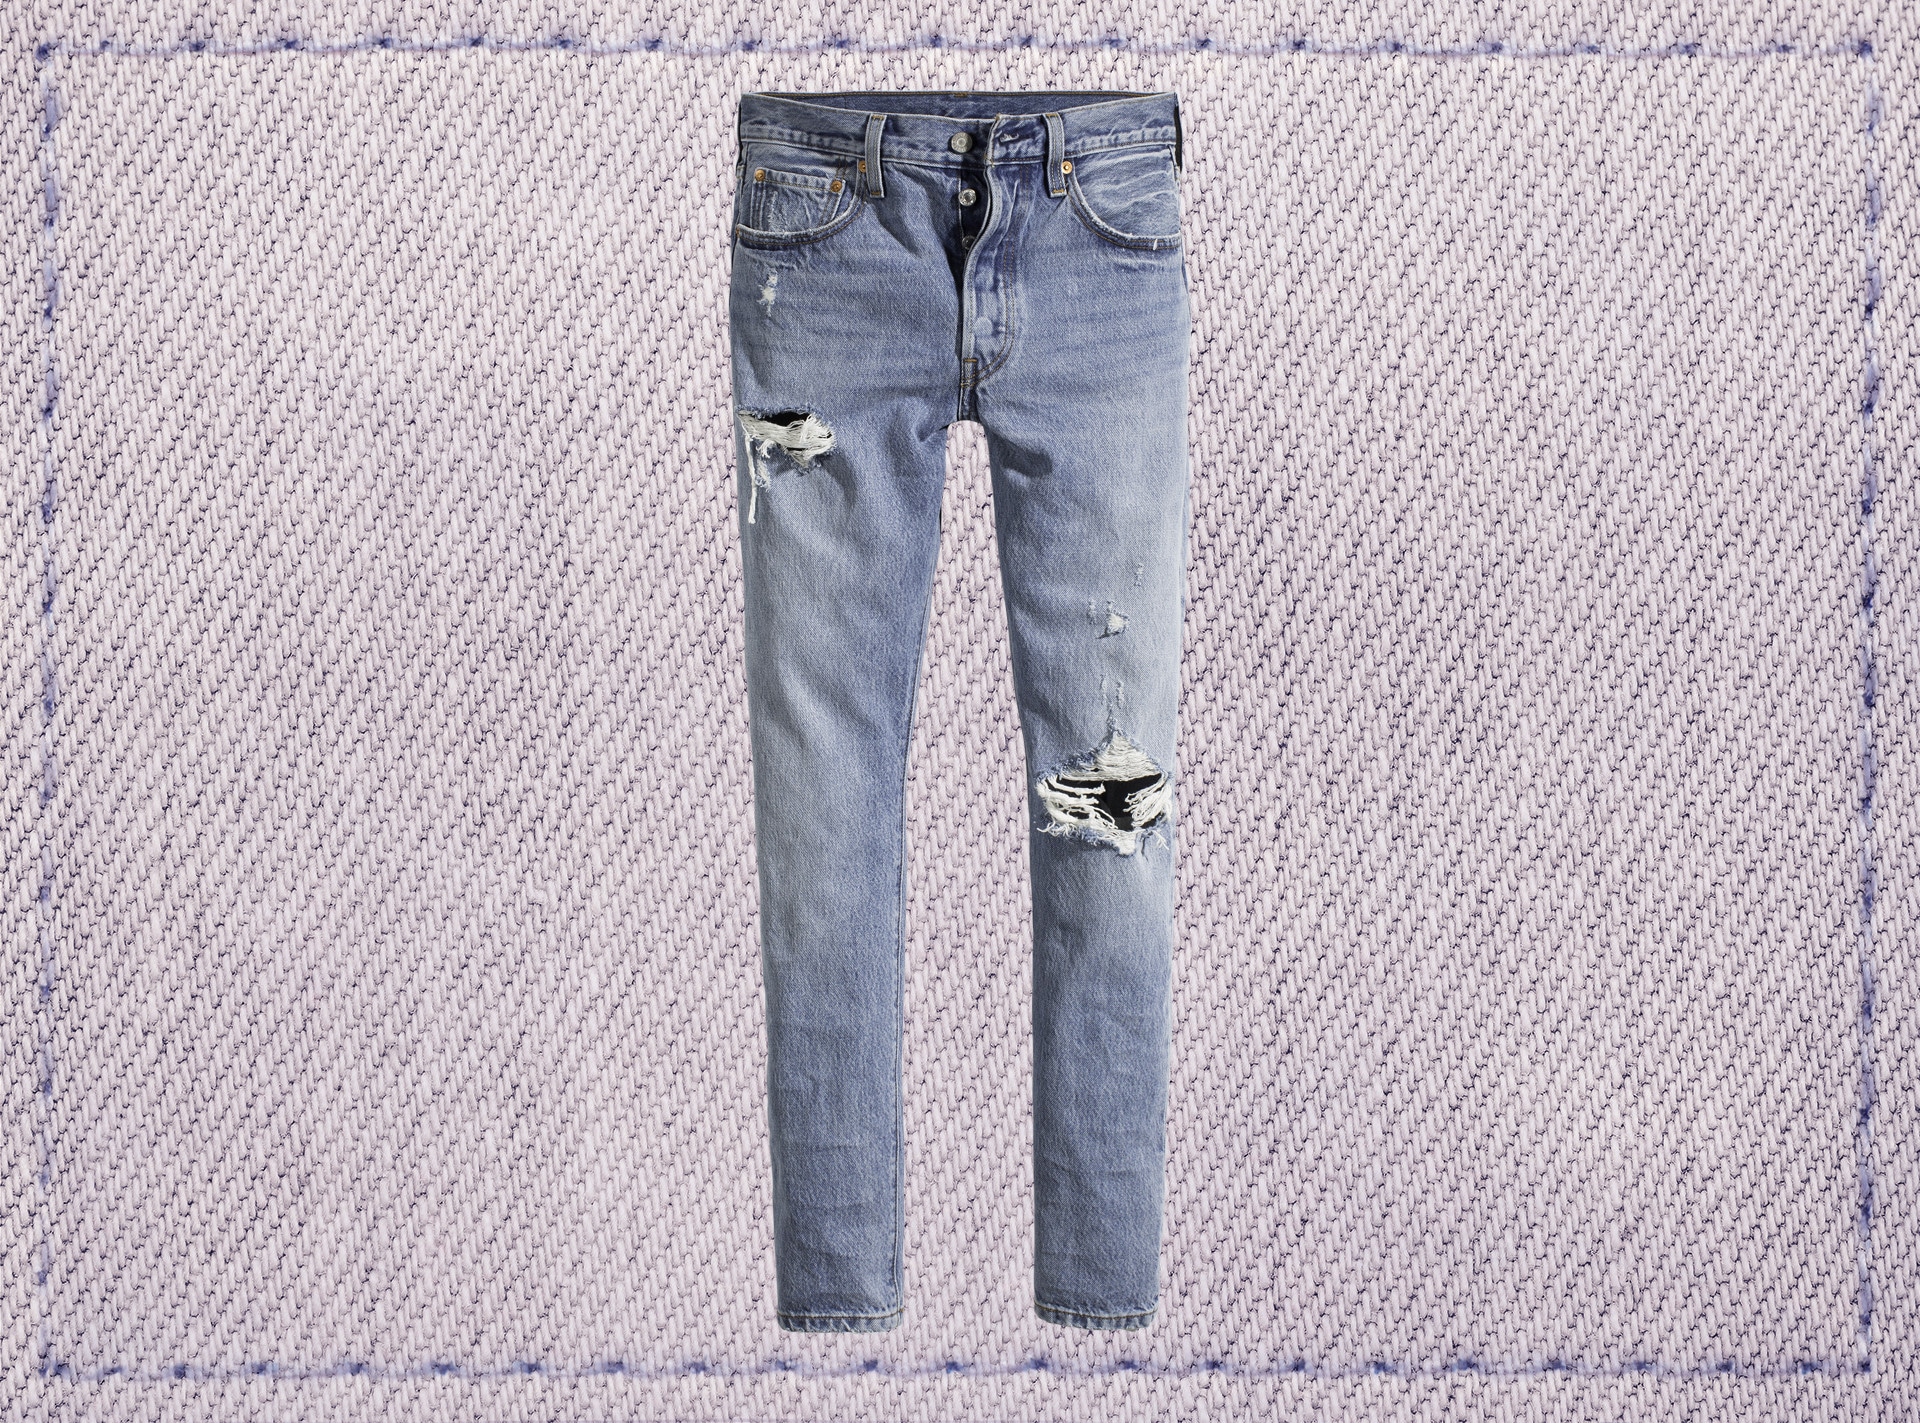 gewoontjes Blauwdruk boog Why This Pair of Classic Levi's Is All Over Instagram - E! Online